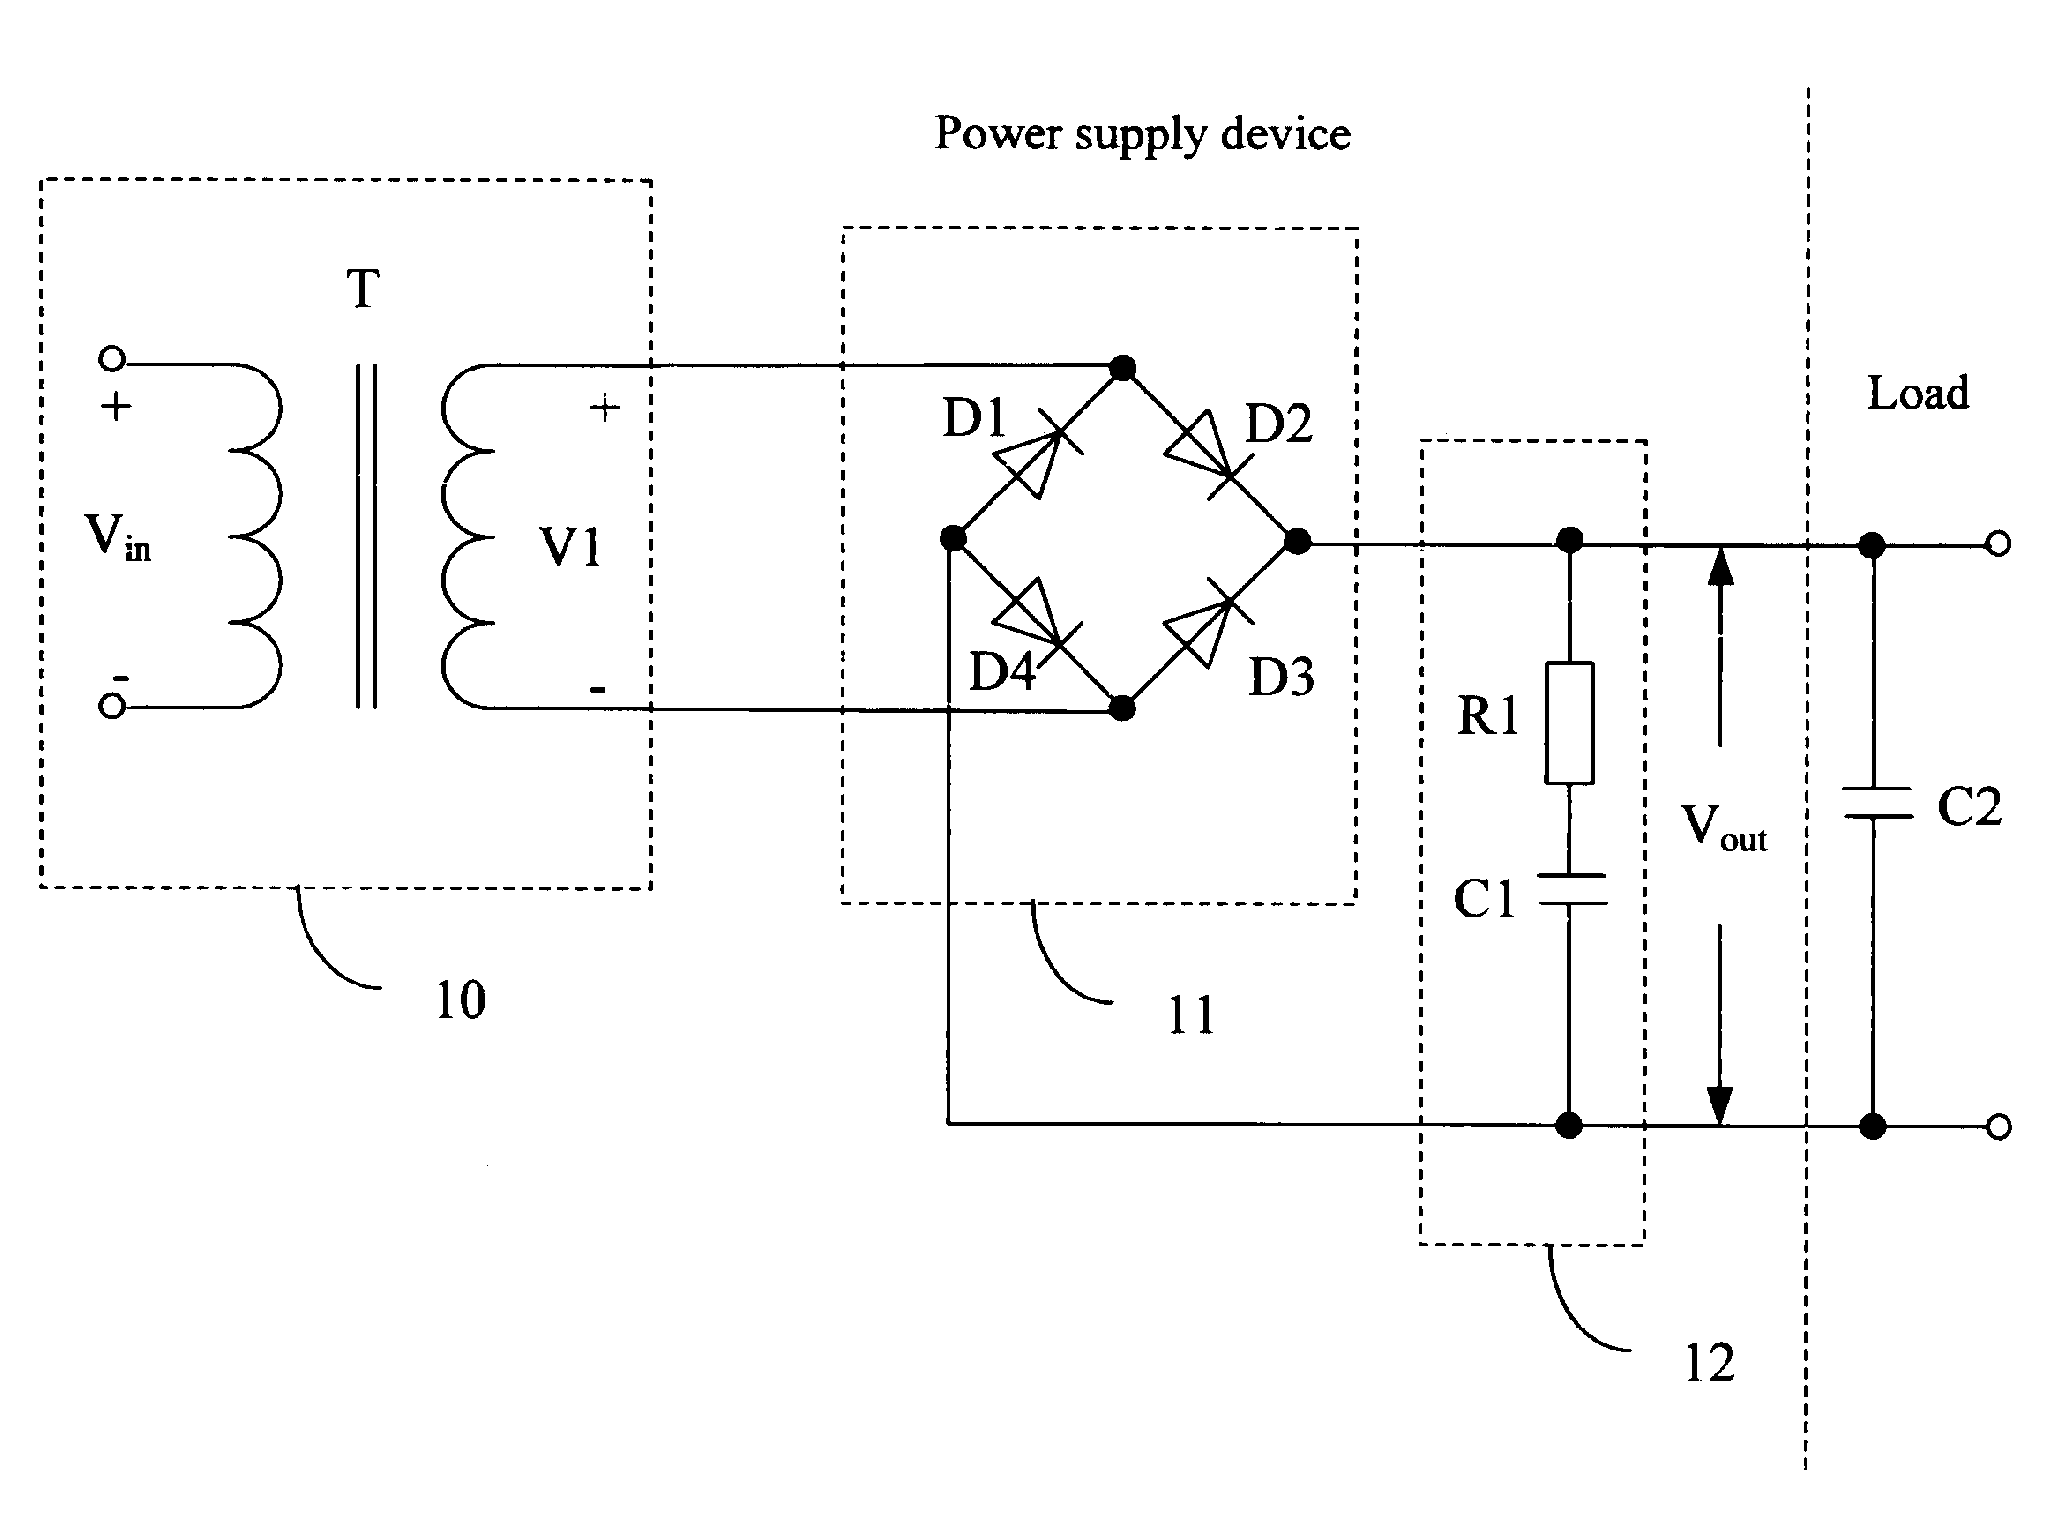 Power supply device with inrush current control circuit